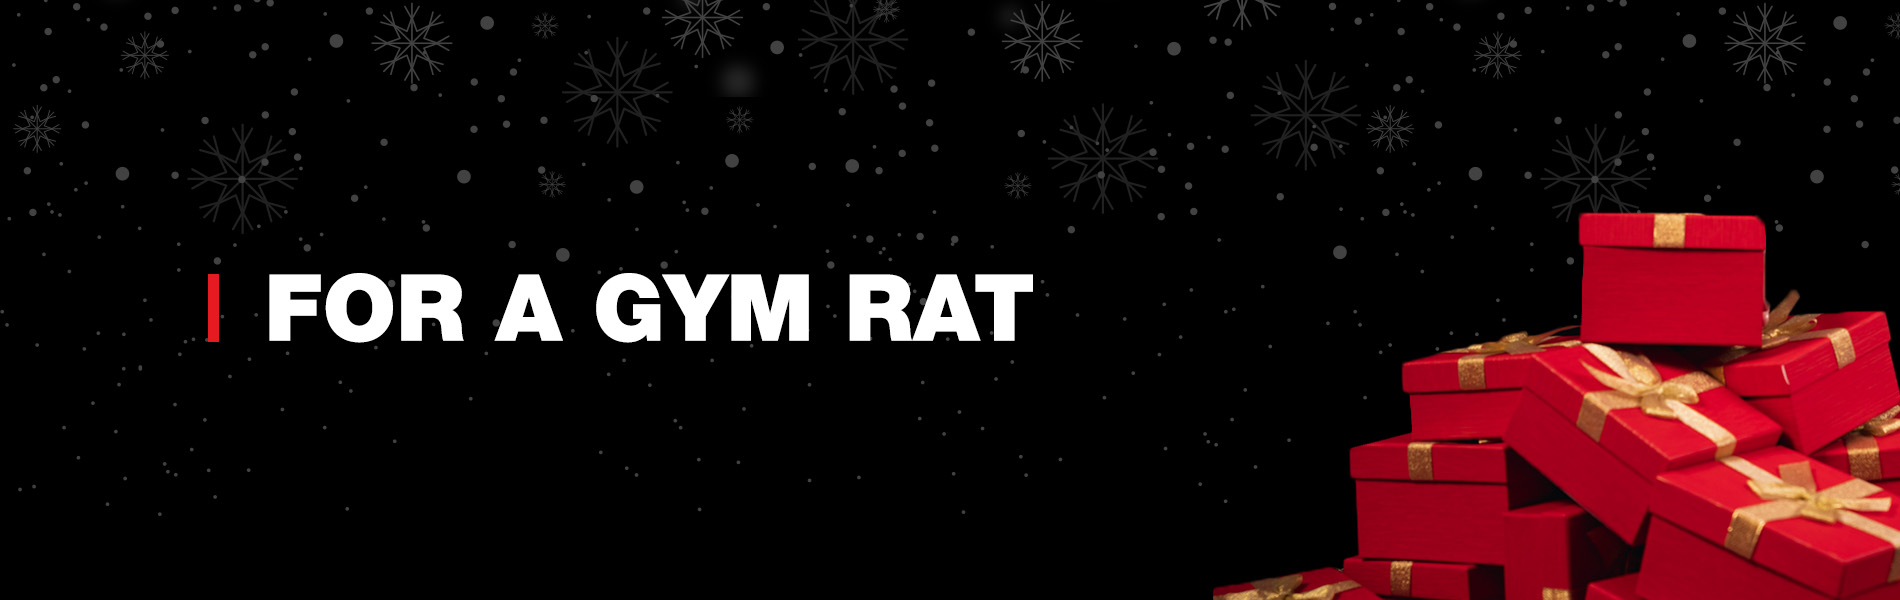 For a gym rat